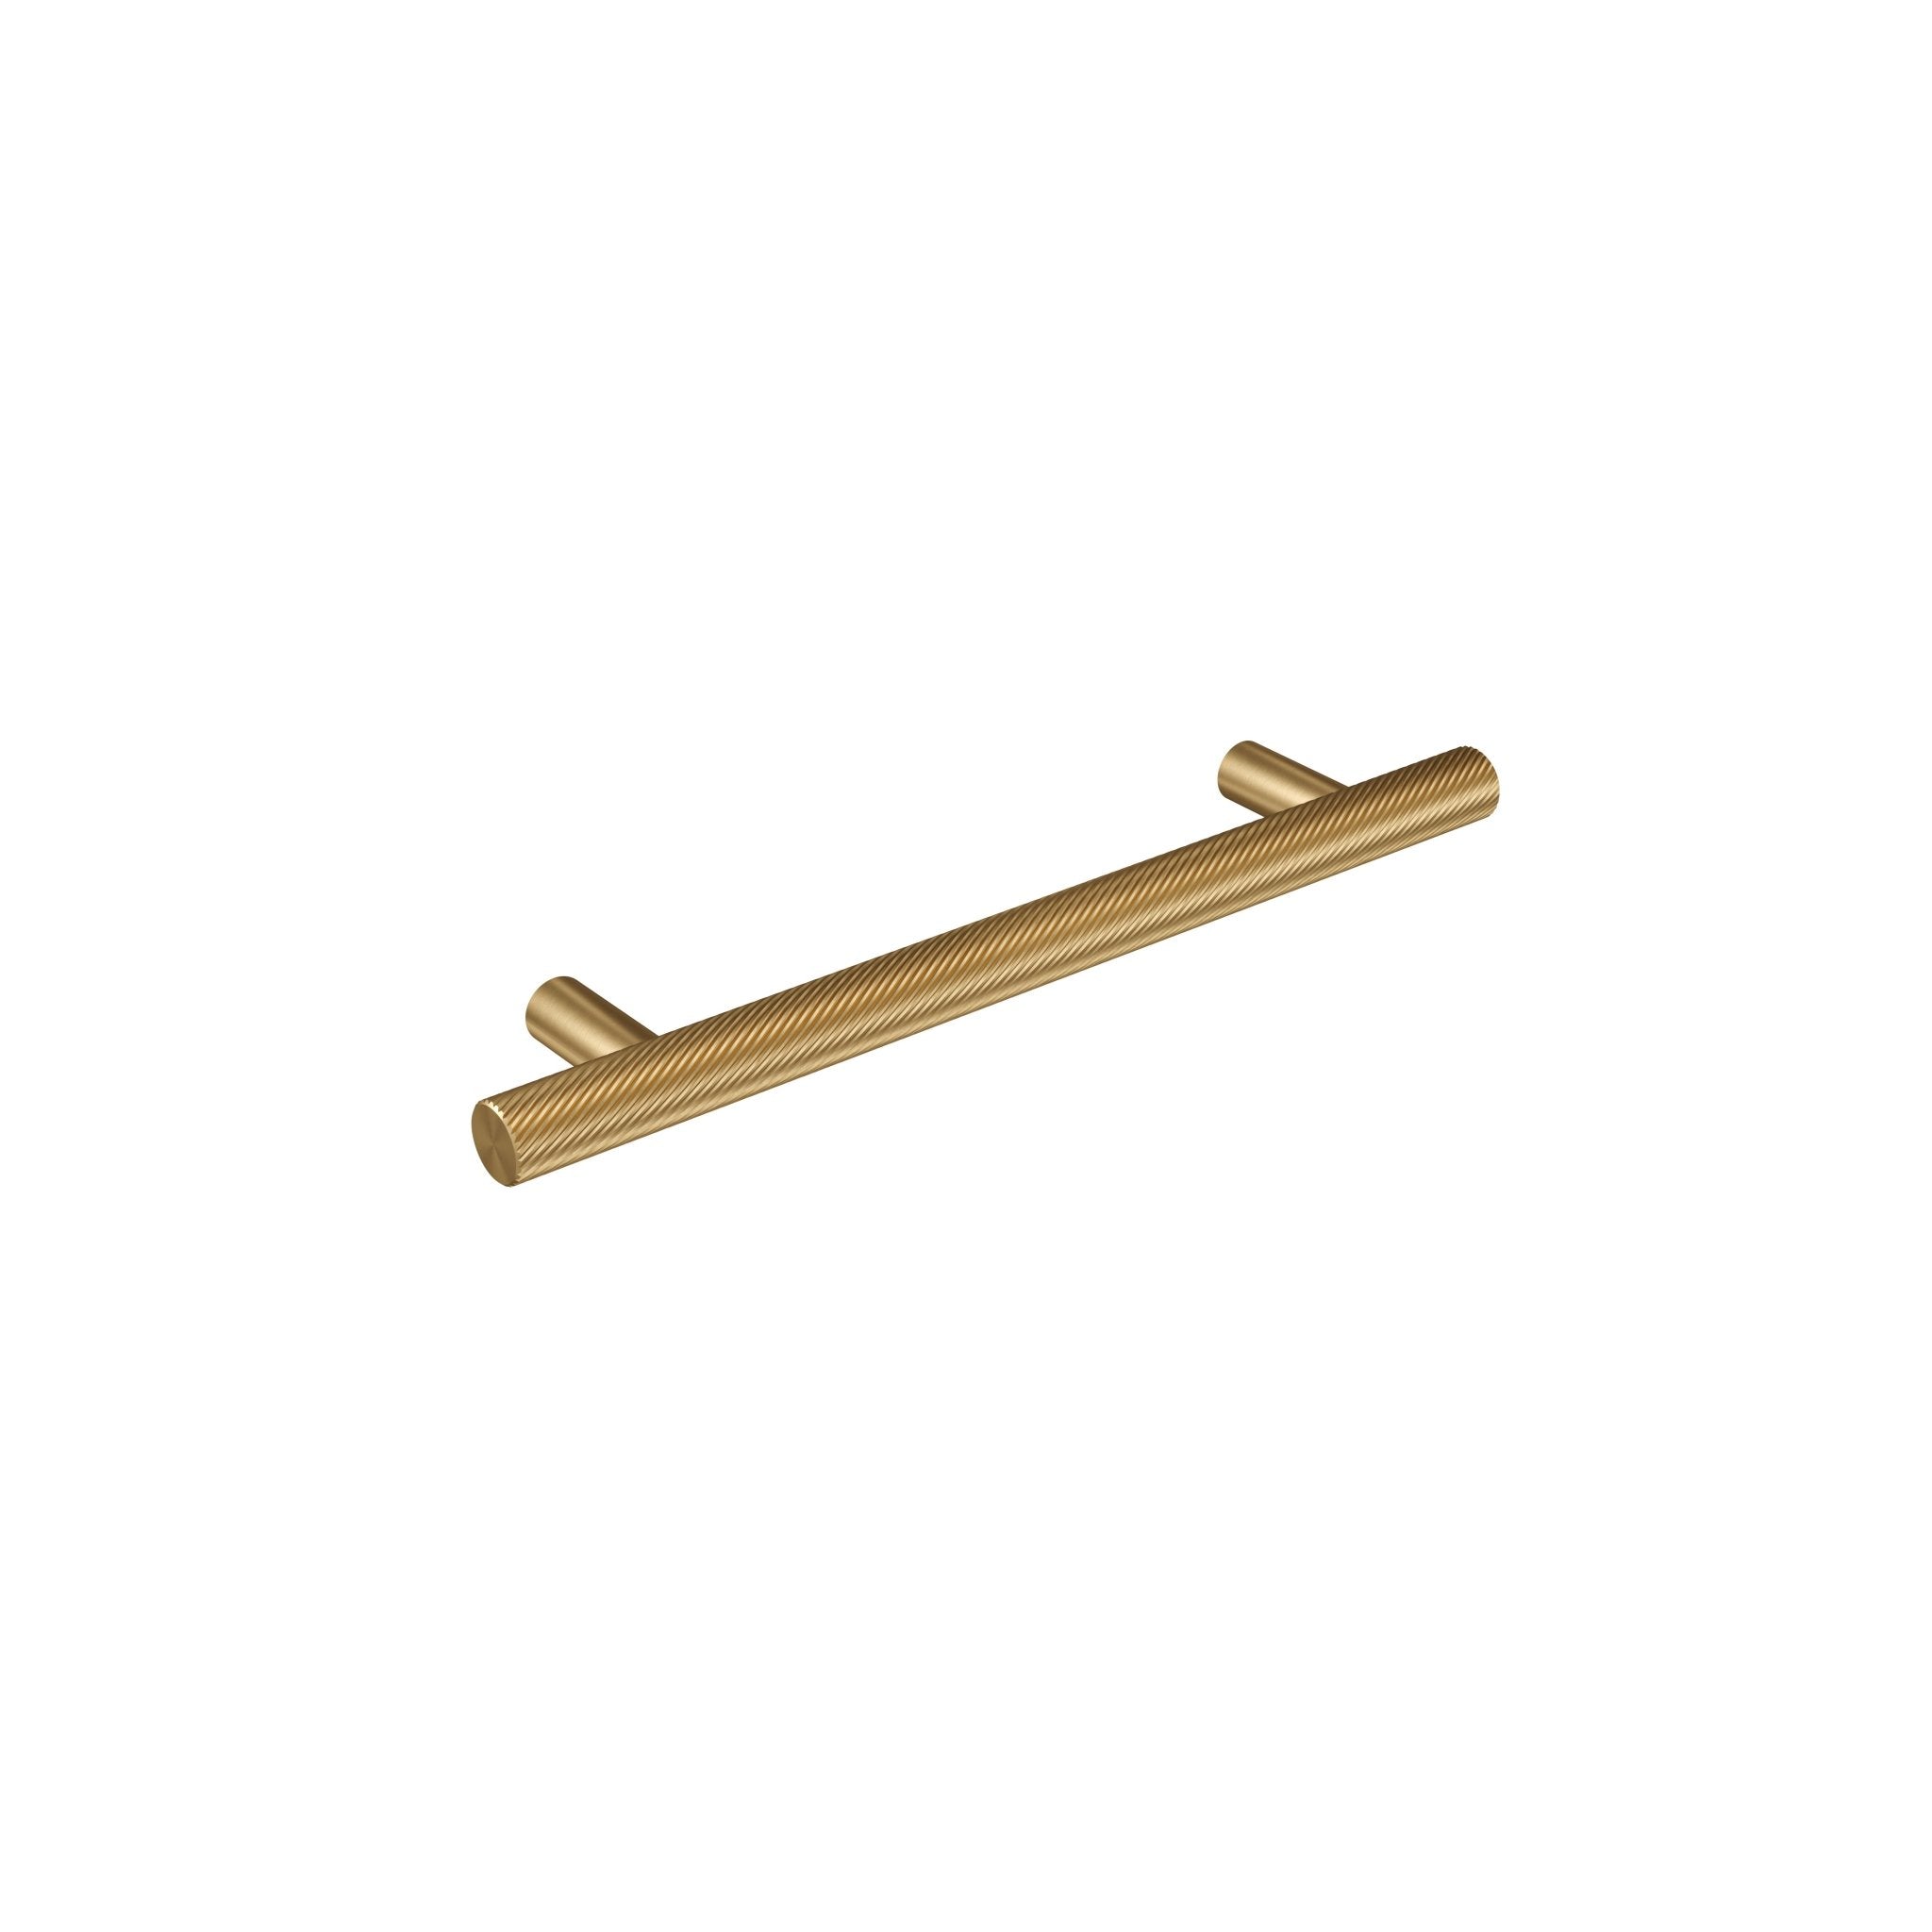 Spiral 12mm Pull Handle-Brushed Brass-180mm-The Hairpin Leg Co.